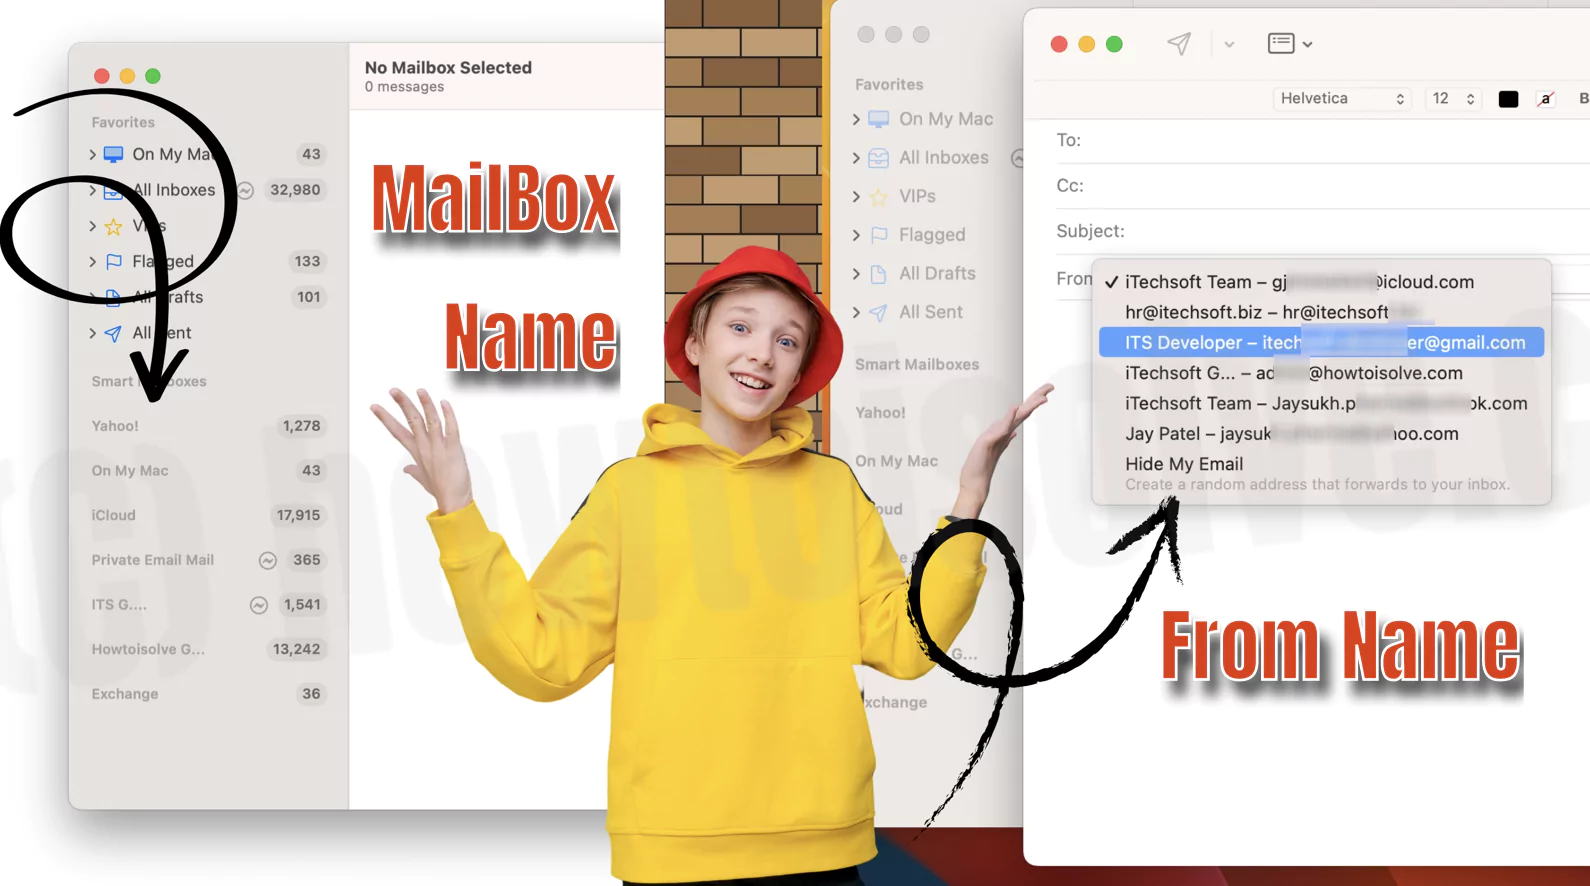 change the name of their email address or Inboxes name on Mac